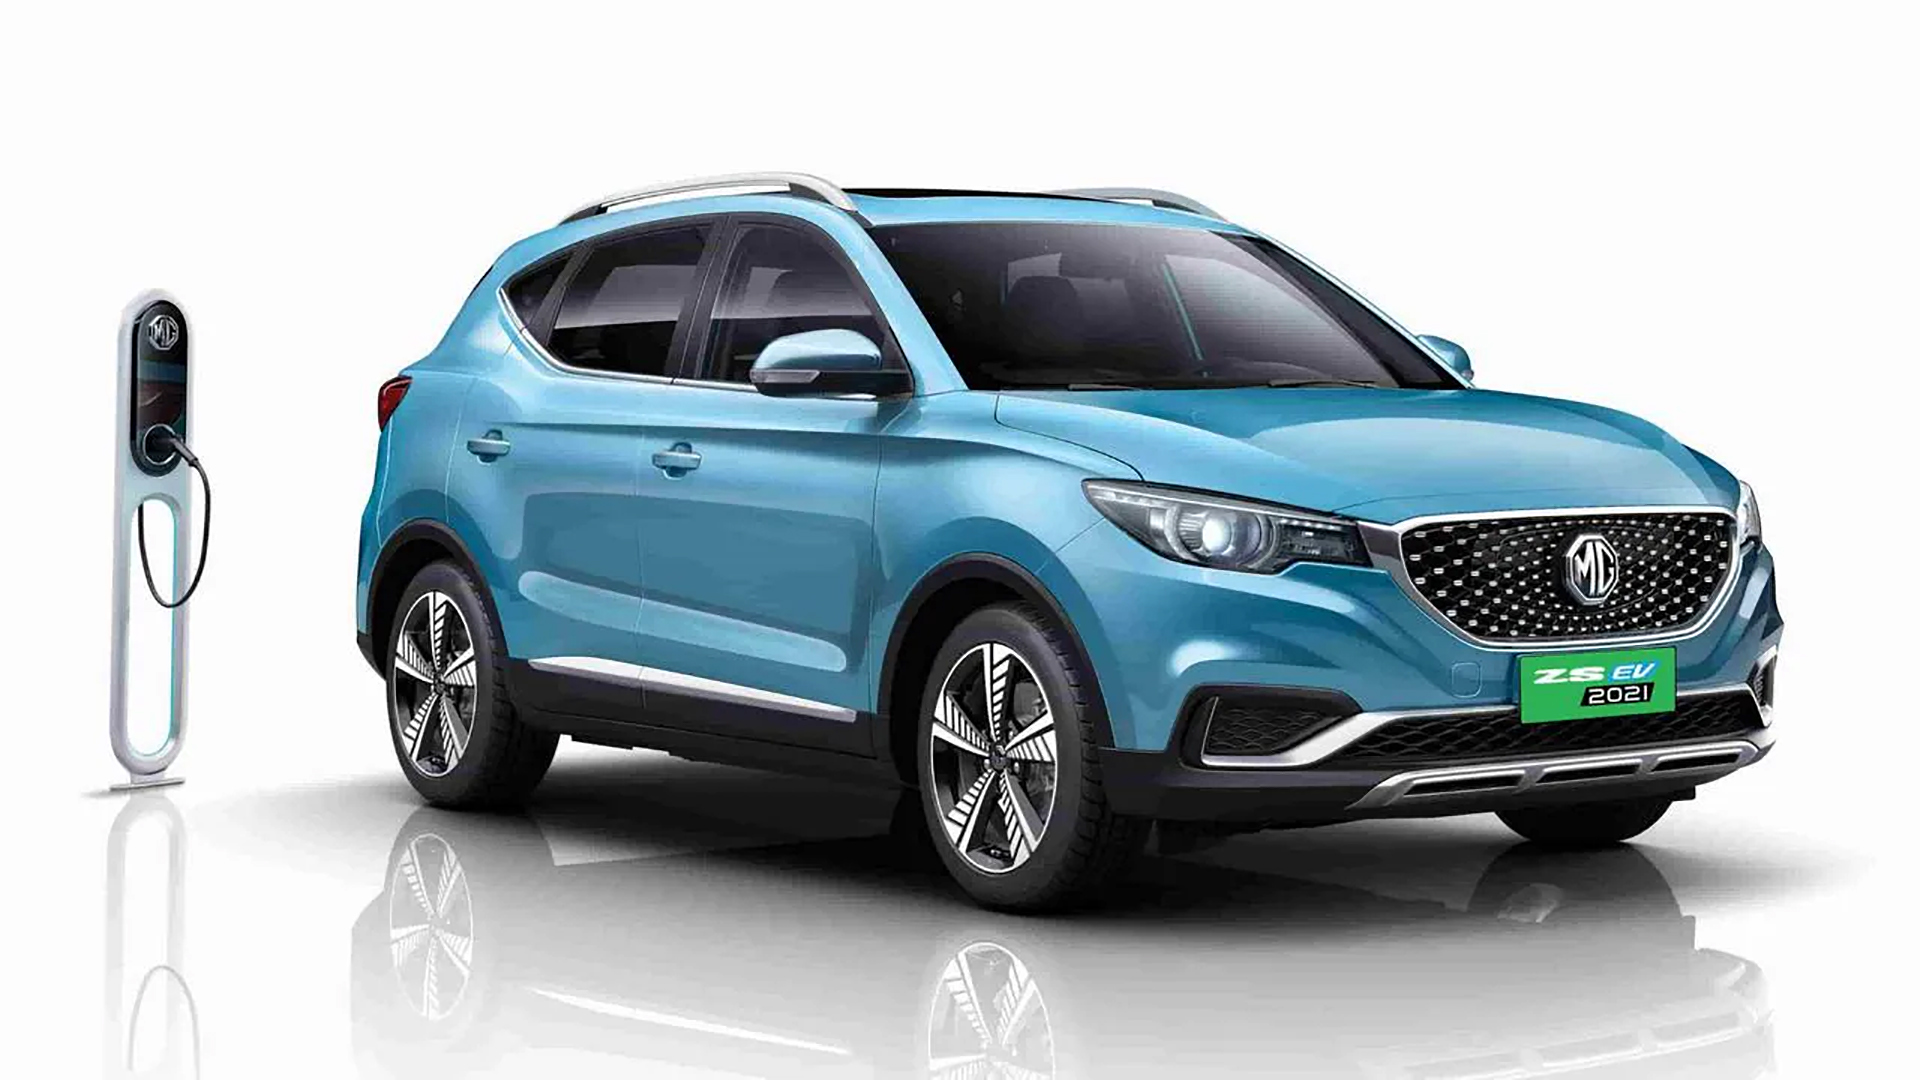 MG Motor India Demonstrates Commitment to Sustainable Mobility with MG ZS EV’s Impressive CO2 Savings on World Environment Day | World Auto Forum